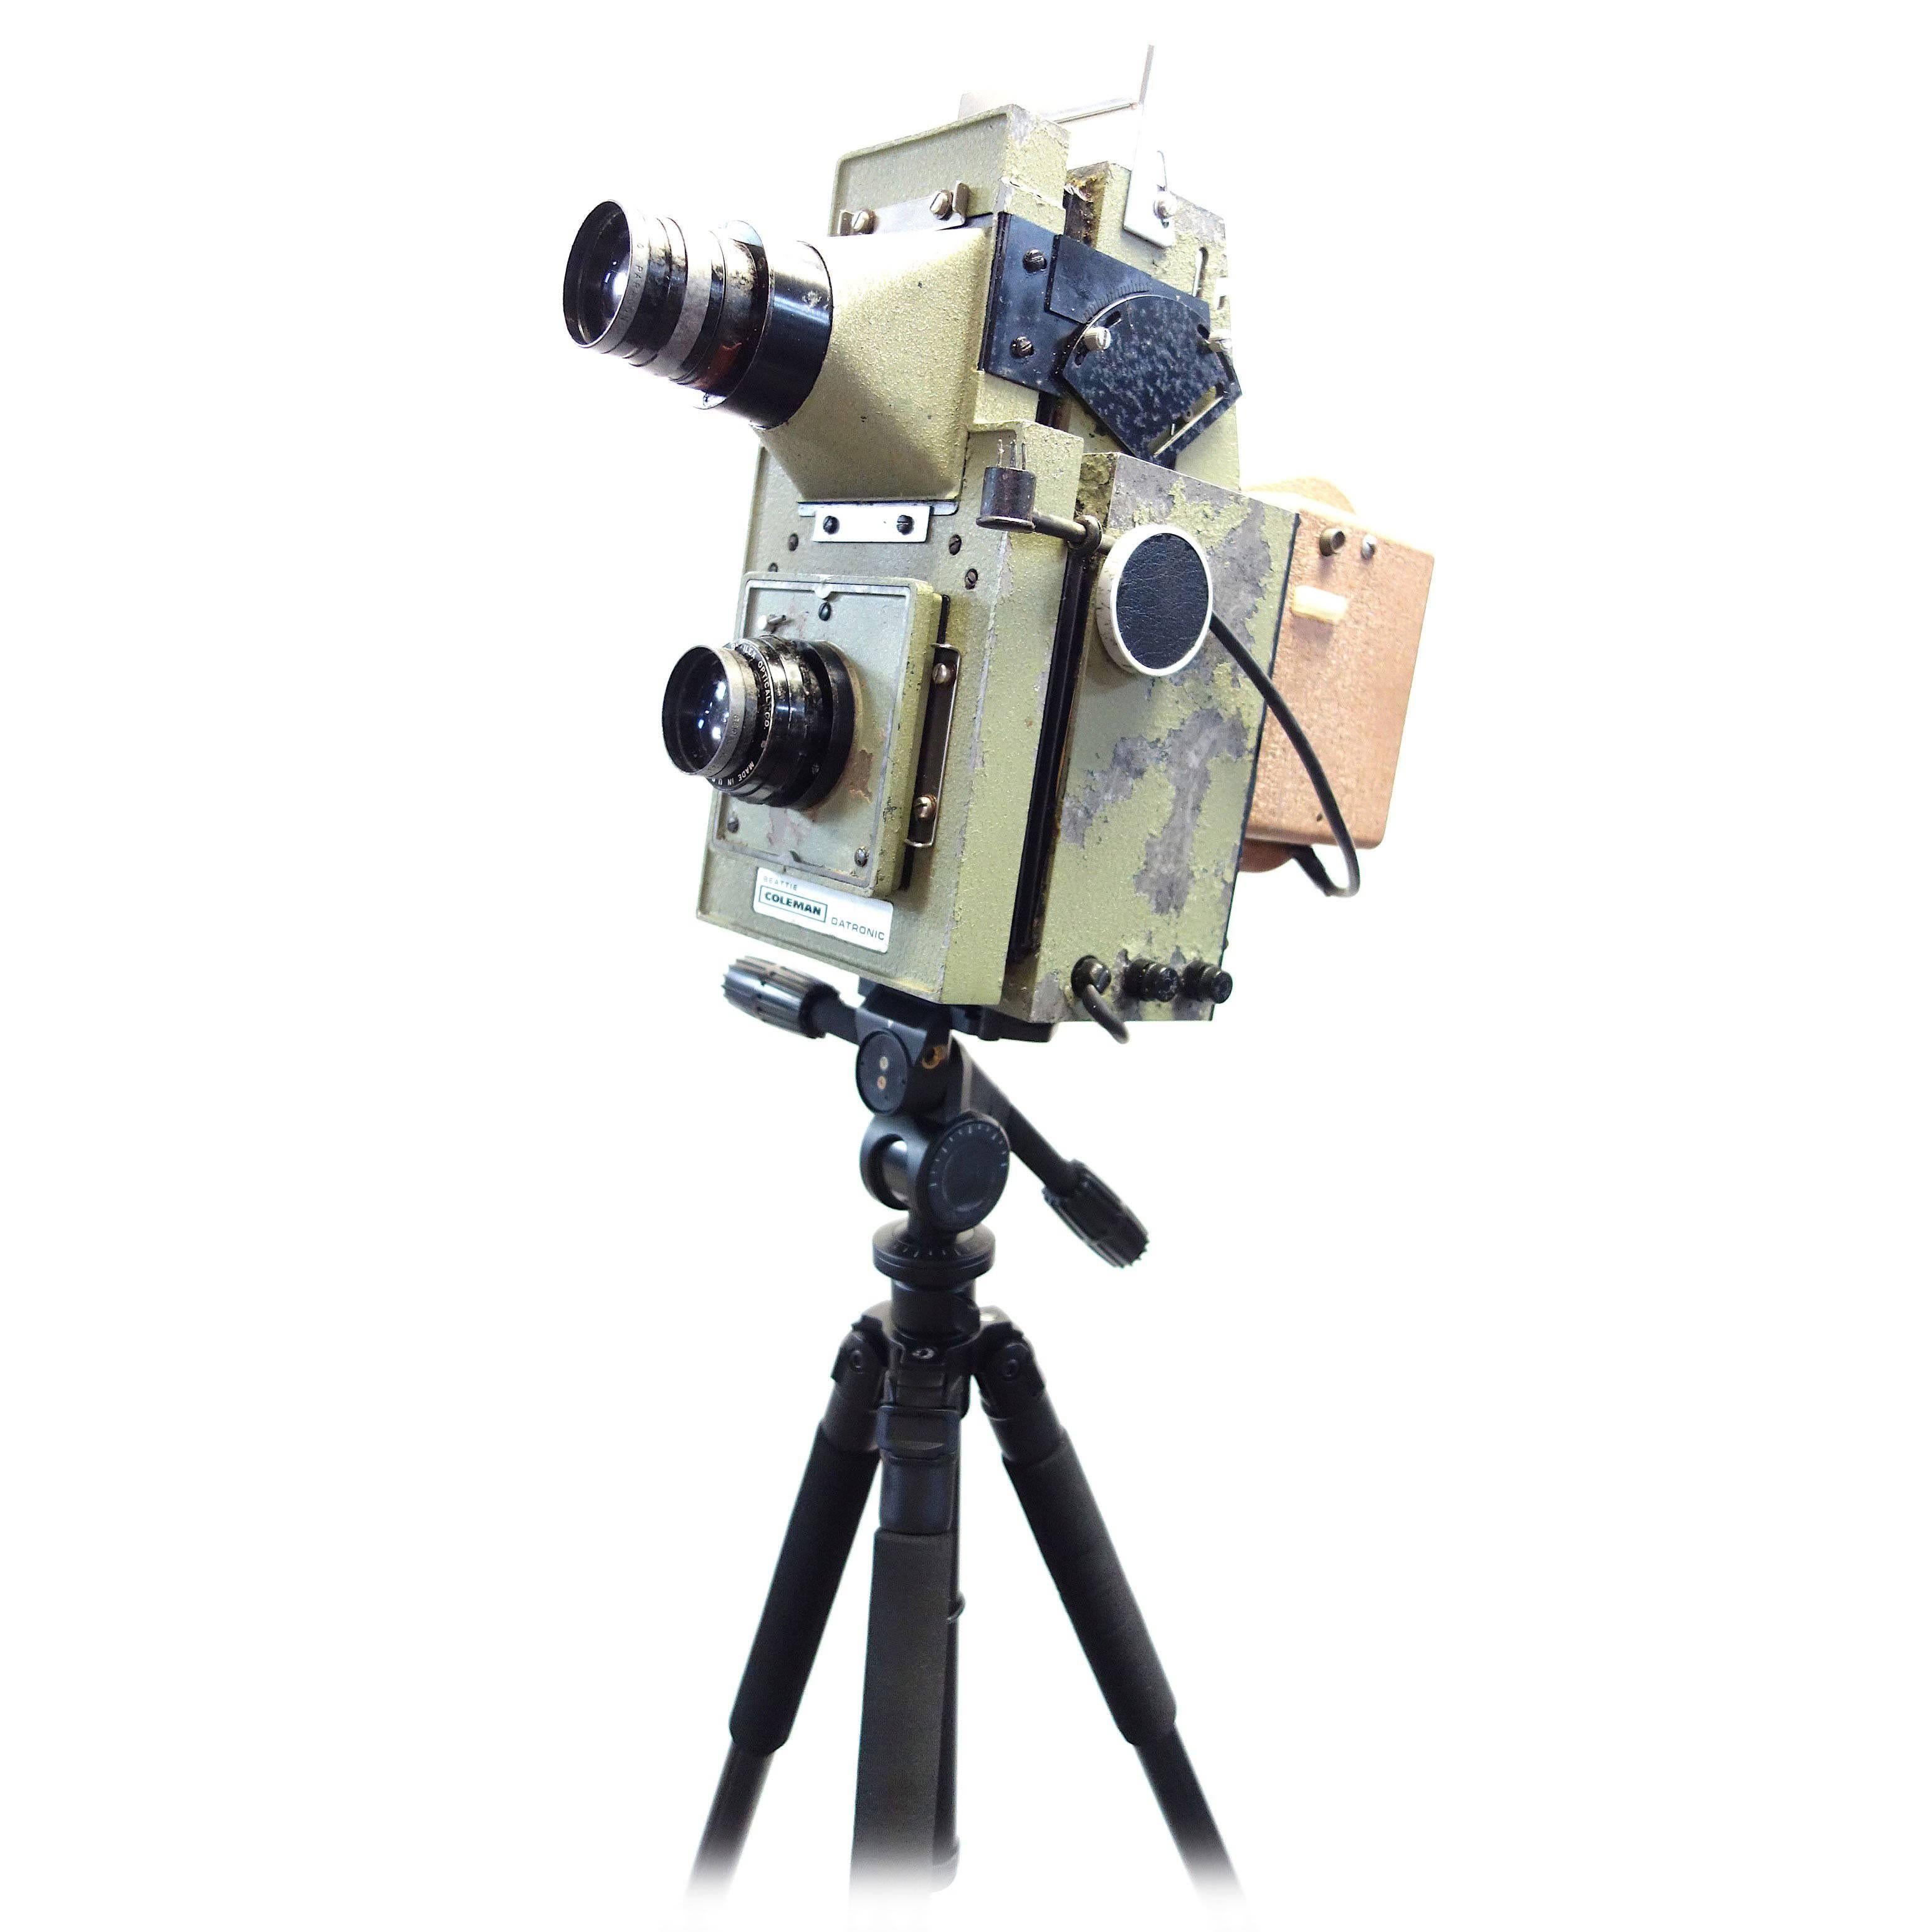 Vintage School Picture Roll Film Movie Look Iconic Display Camera. TAKE 60%OFF. For Sale